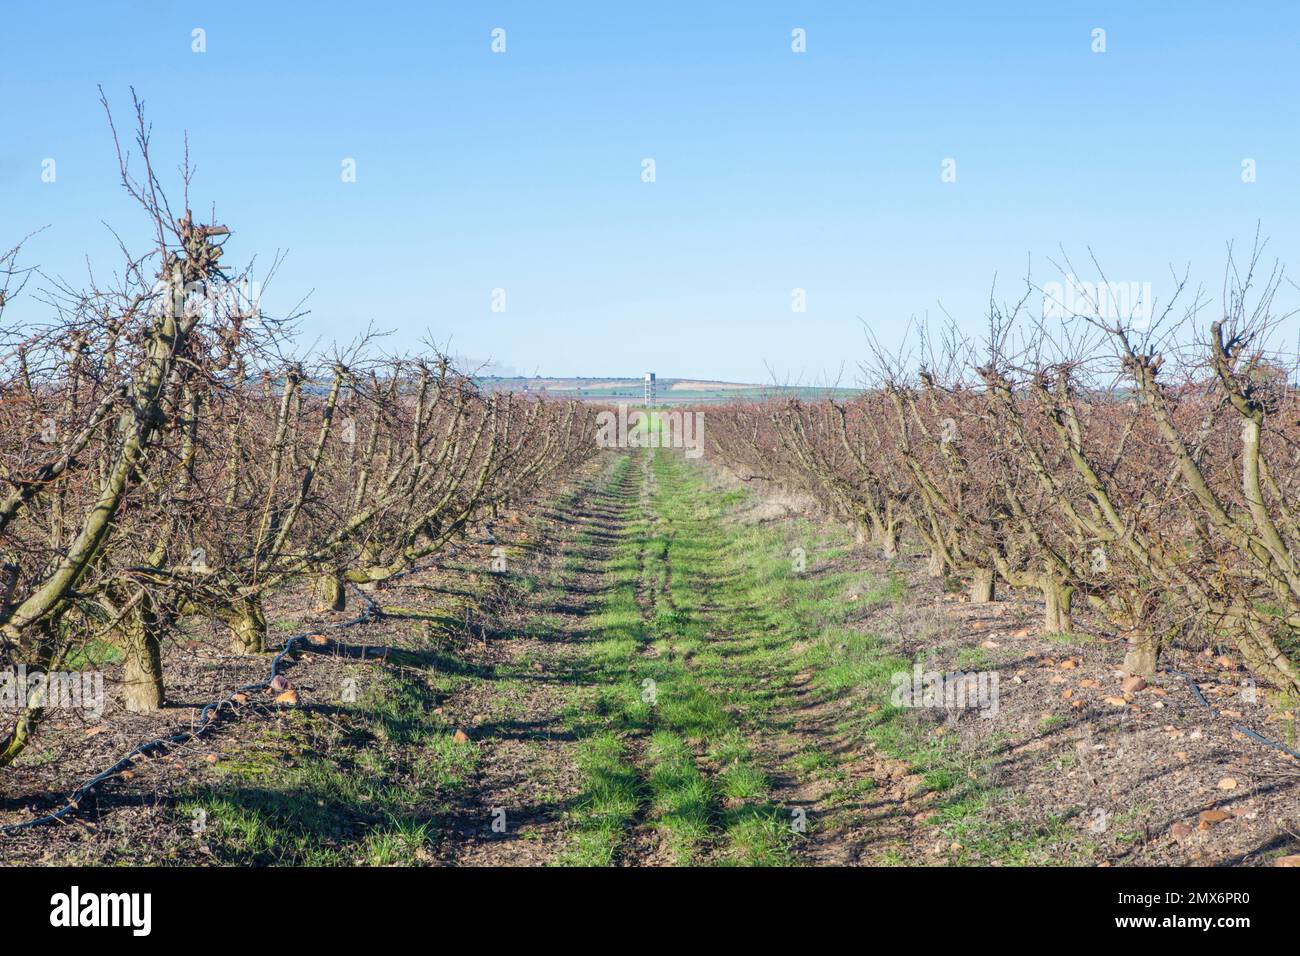 Fruit trees plantation on winter. Field irrigated with dripping system with water tank at bottom. Stock Photo